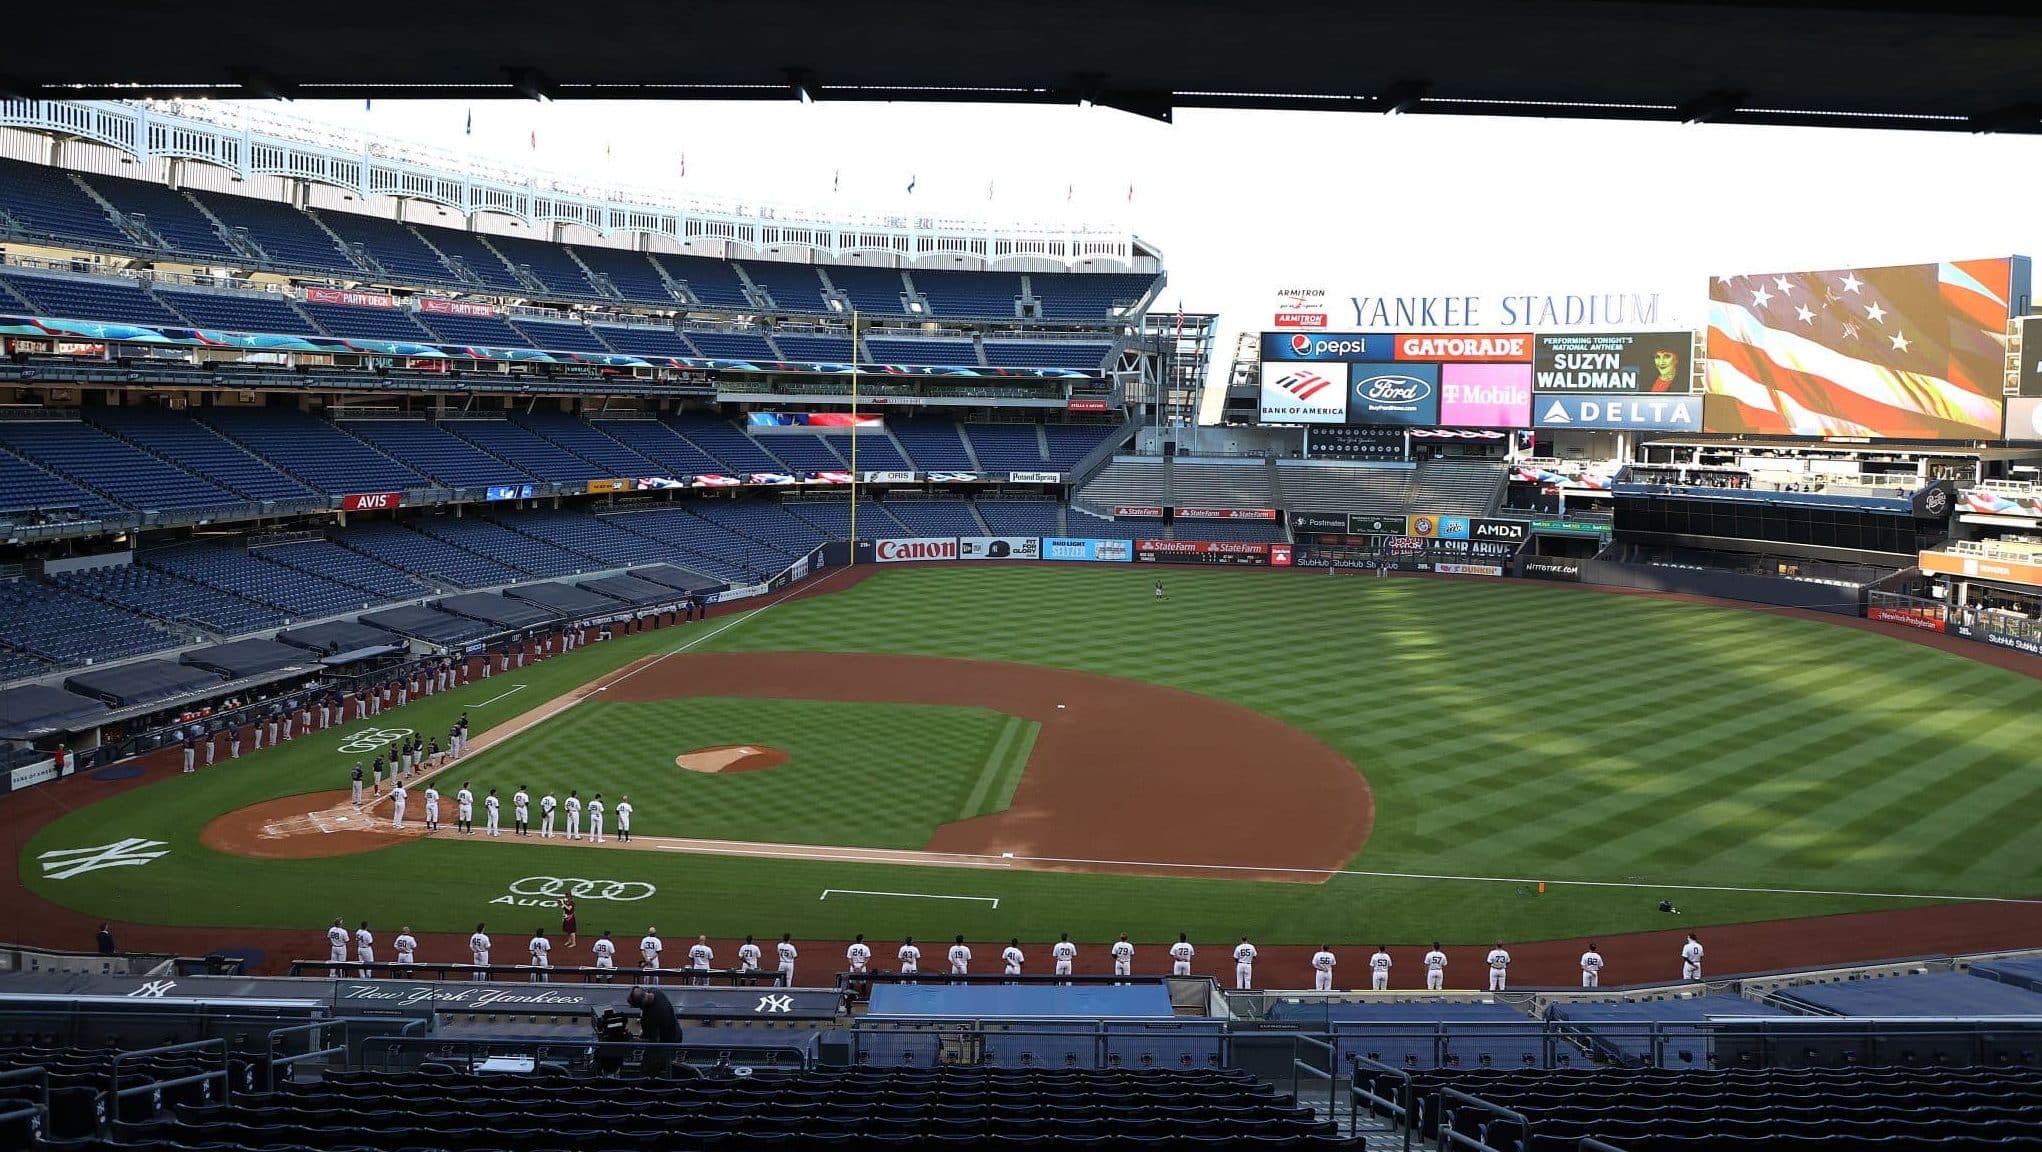 NEW YORK, NEW YORK - JULY 31: The New York Yankees and the Boston Red Sox stand for the national anthem during their home opener at Yankee Stadium on July 31, 2020 in New York City. The 2020 season had been postponed since March due to the COVID-19 pandemic.